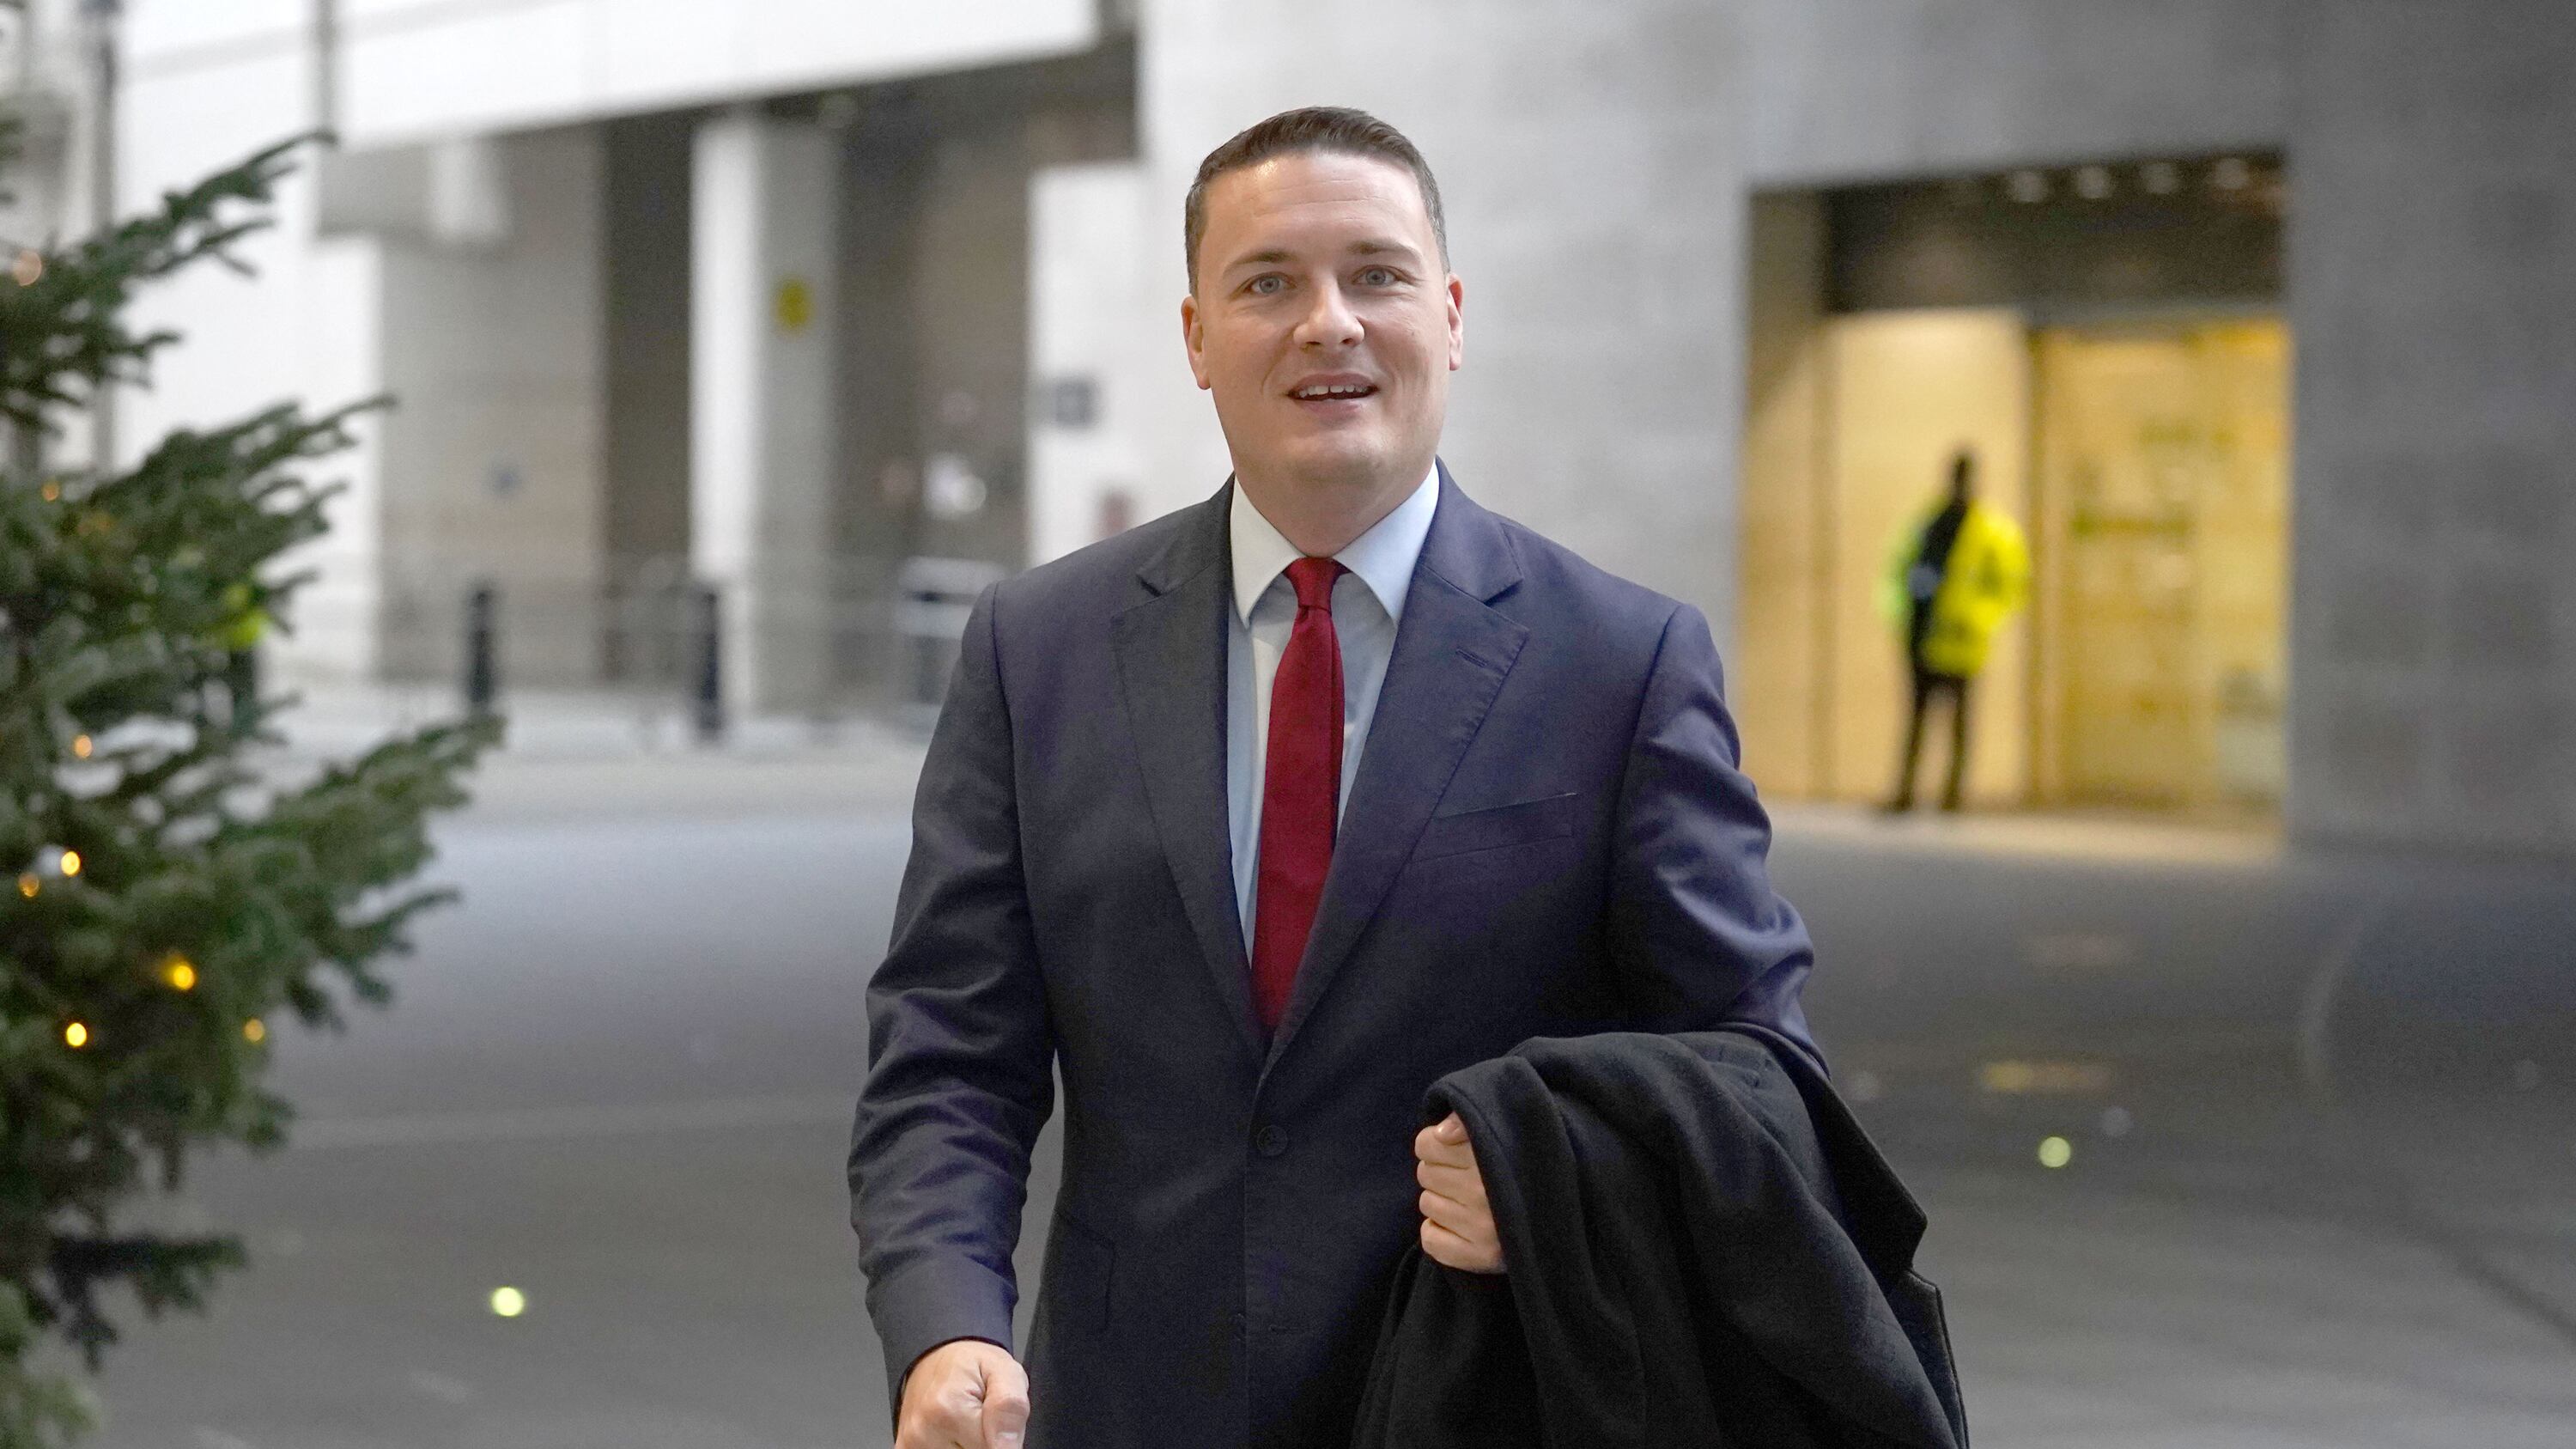 Wes Streeting criticised the Government for its handling of the NHS over the last 13 years